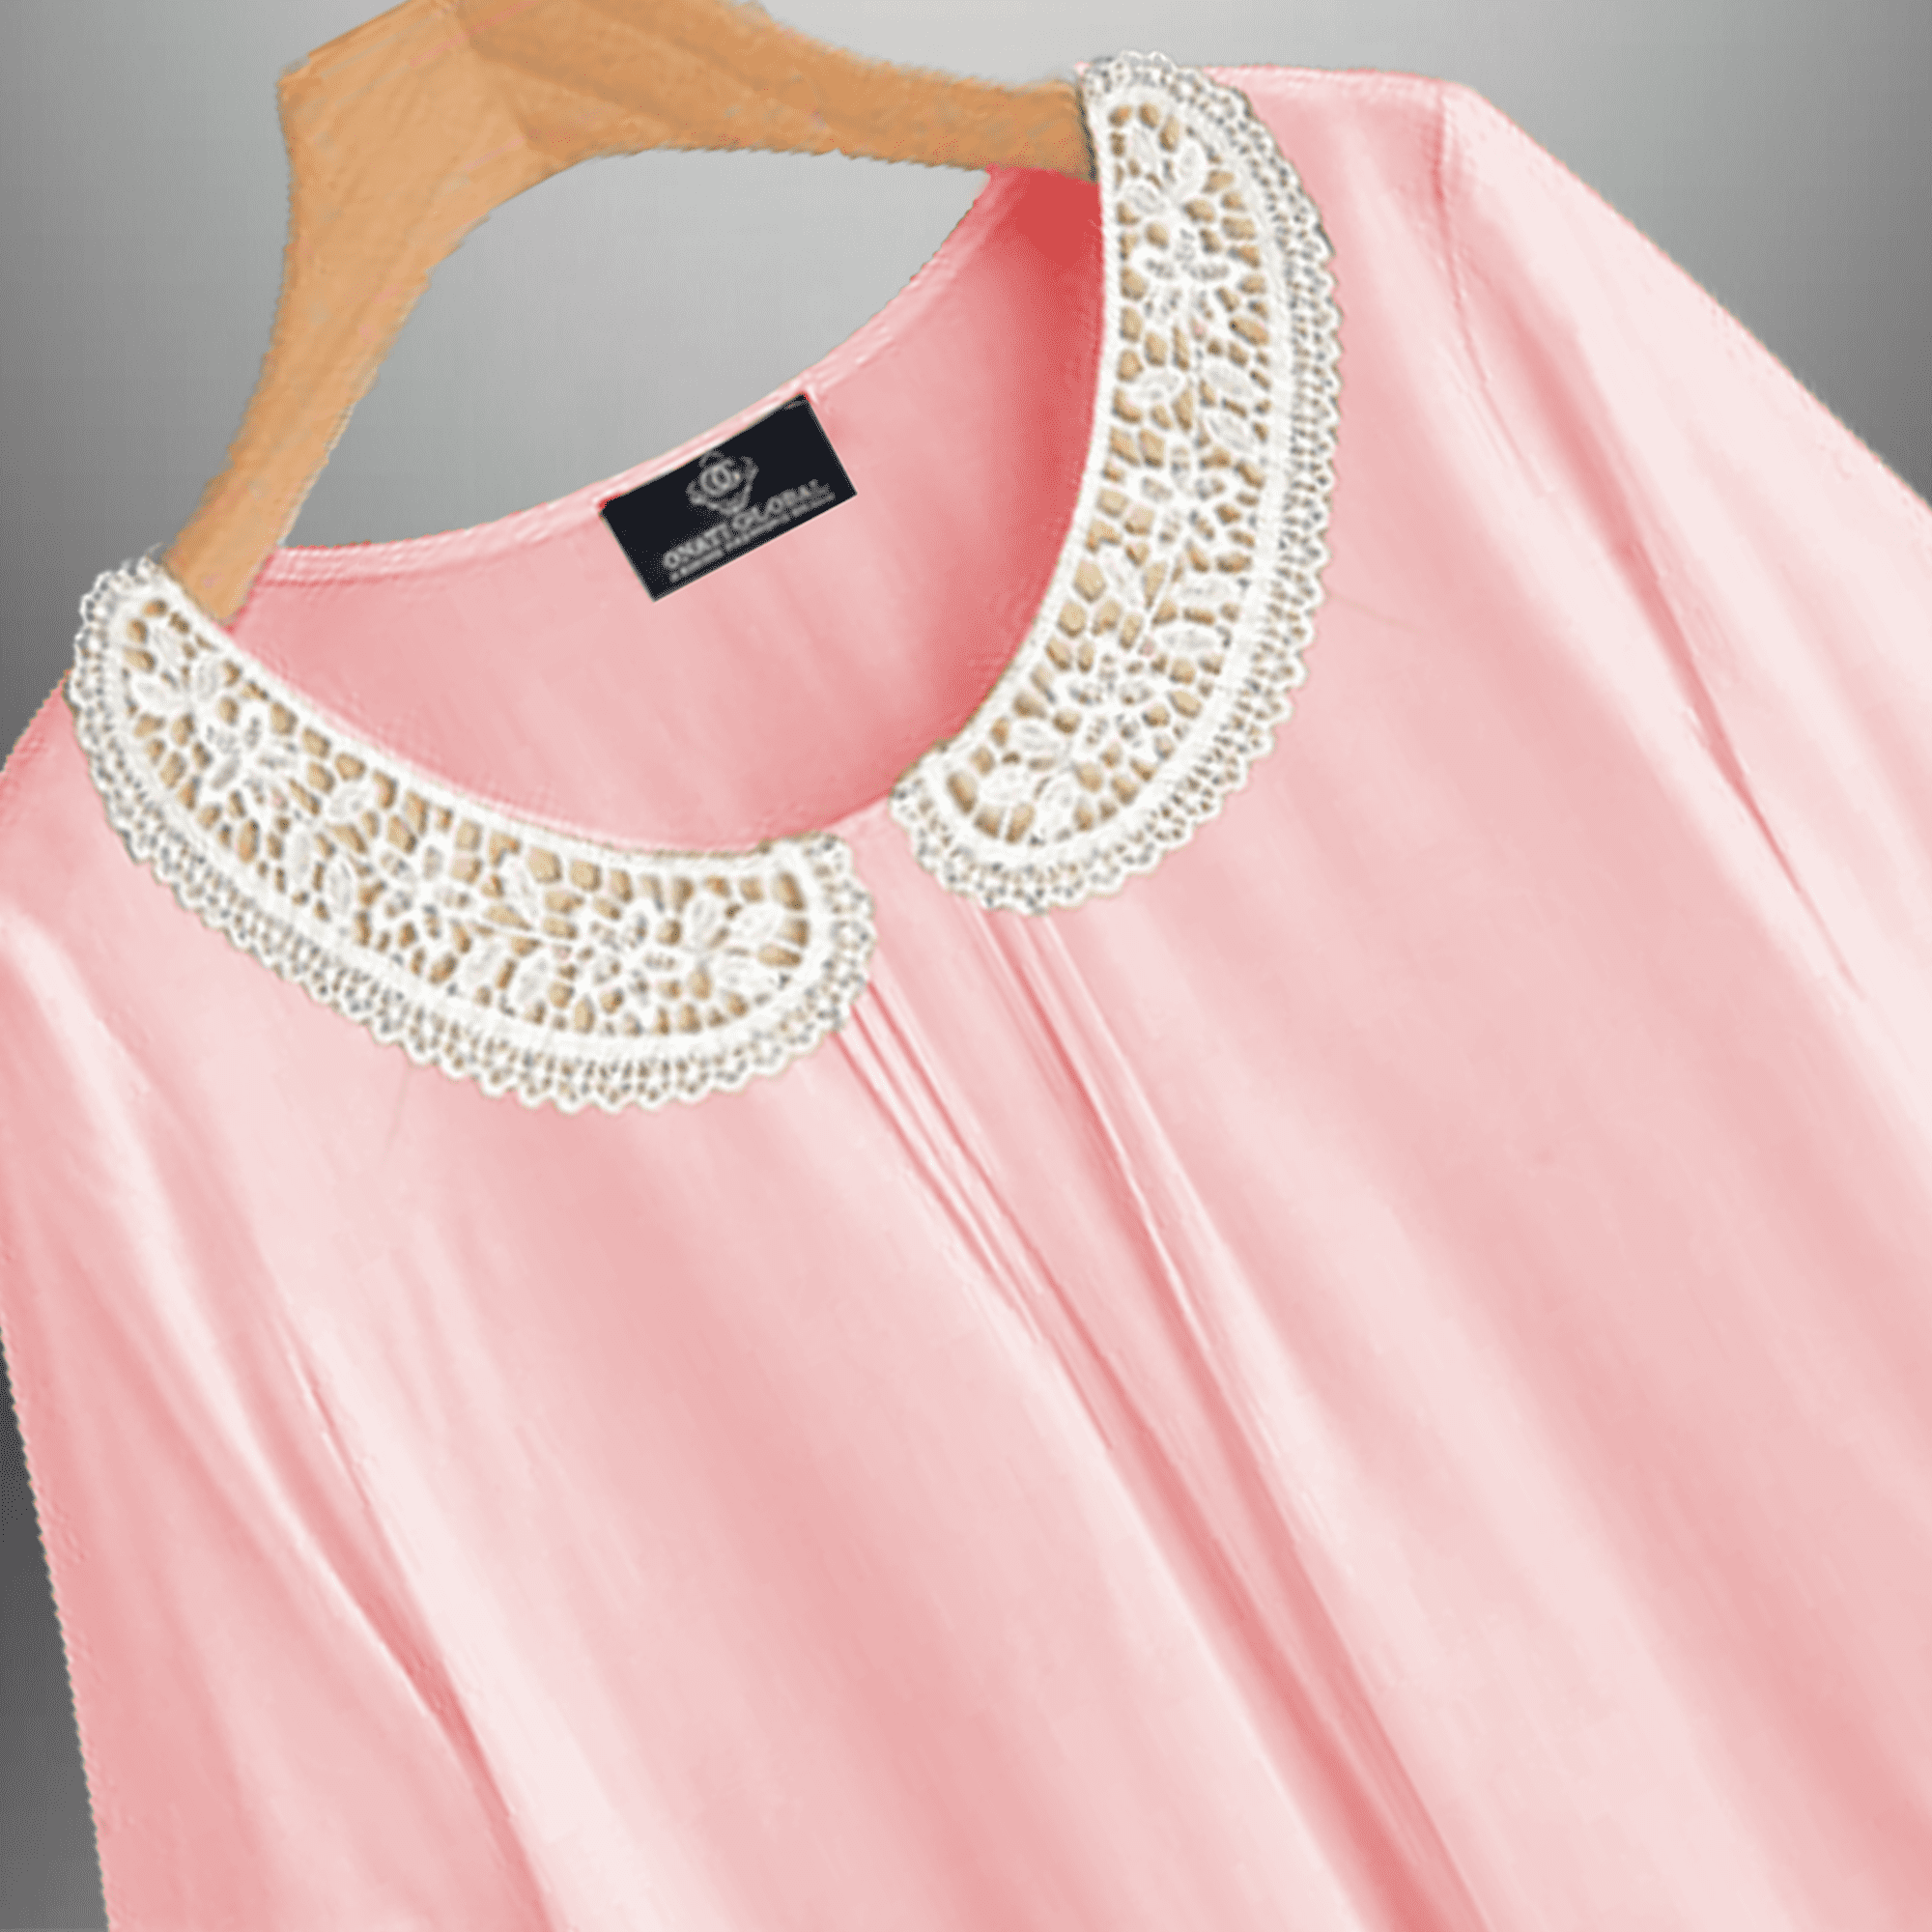 Women's Baby Pink Top with White Lace Embellishment-RET102